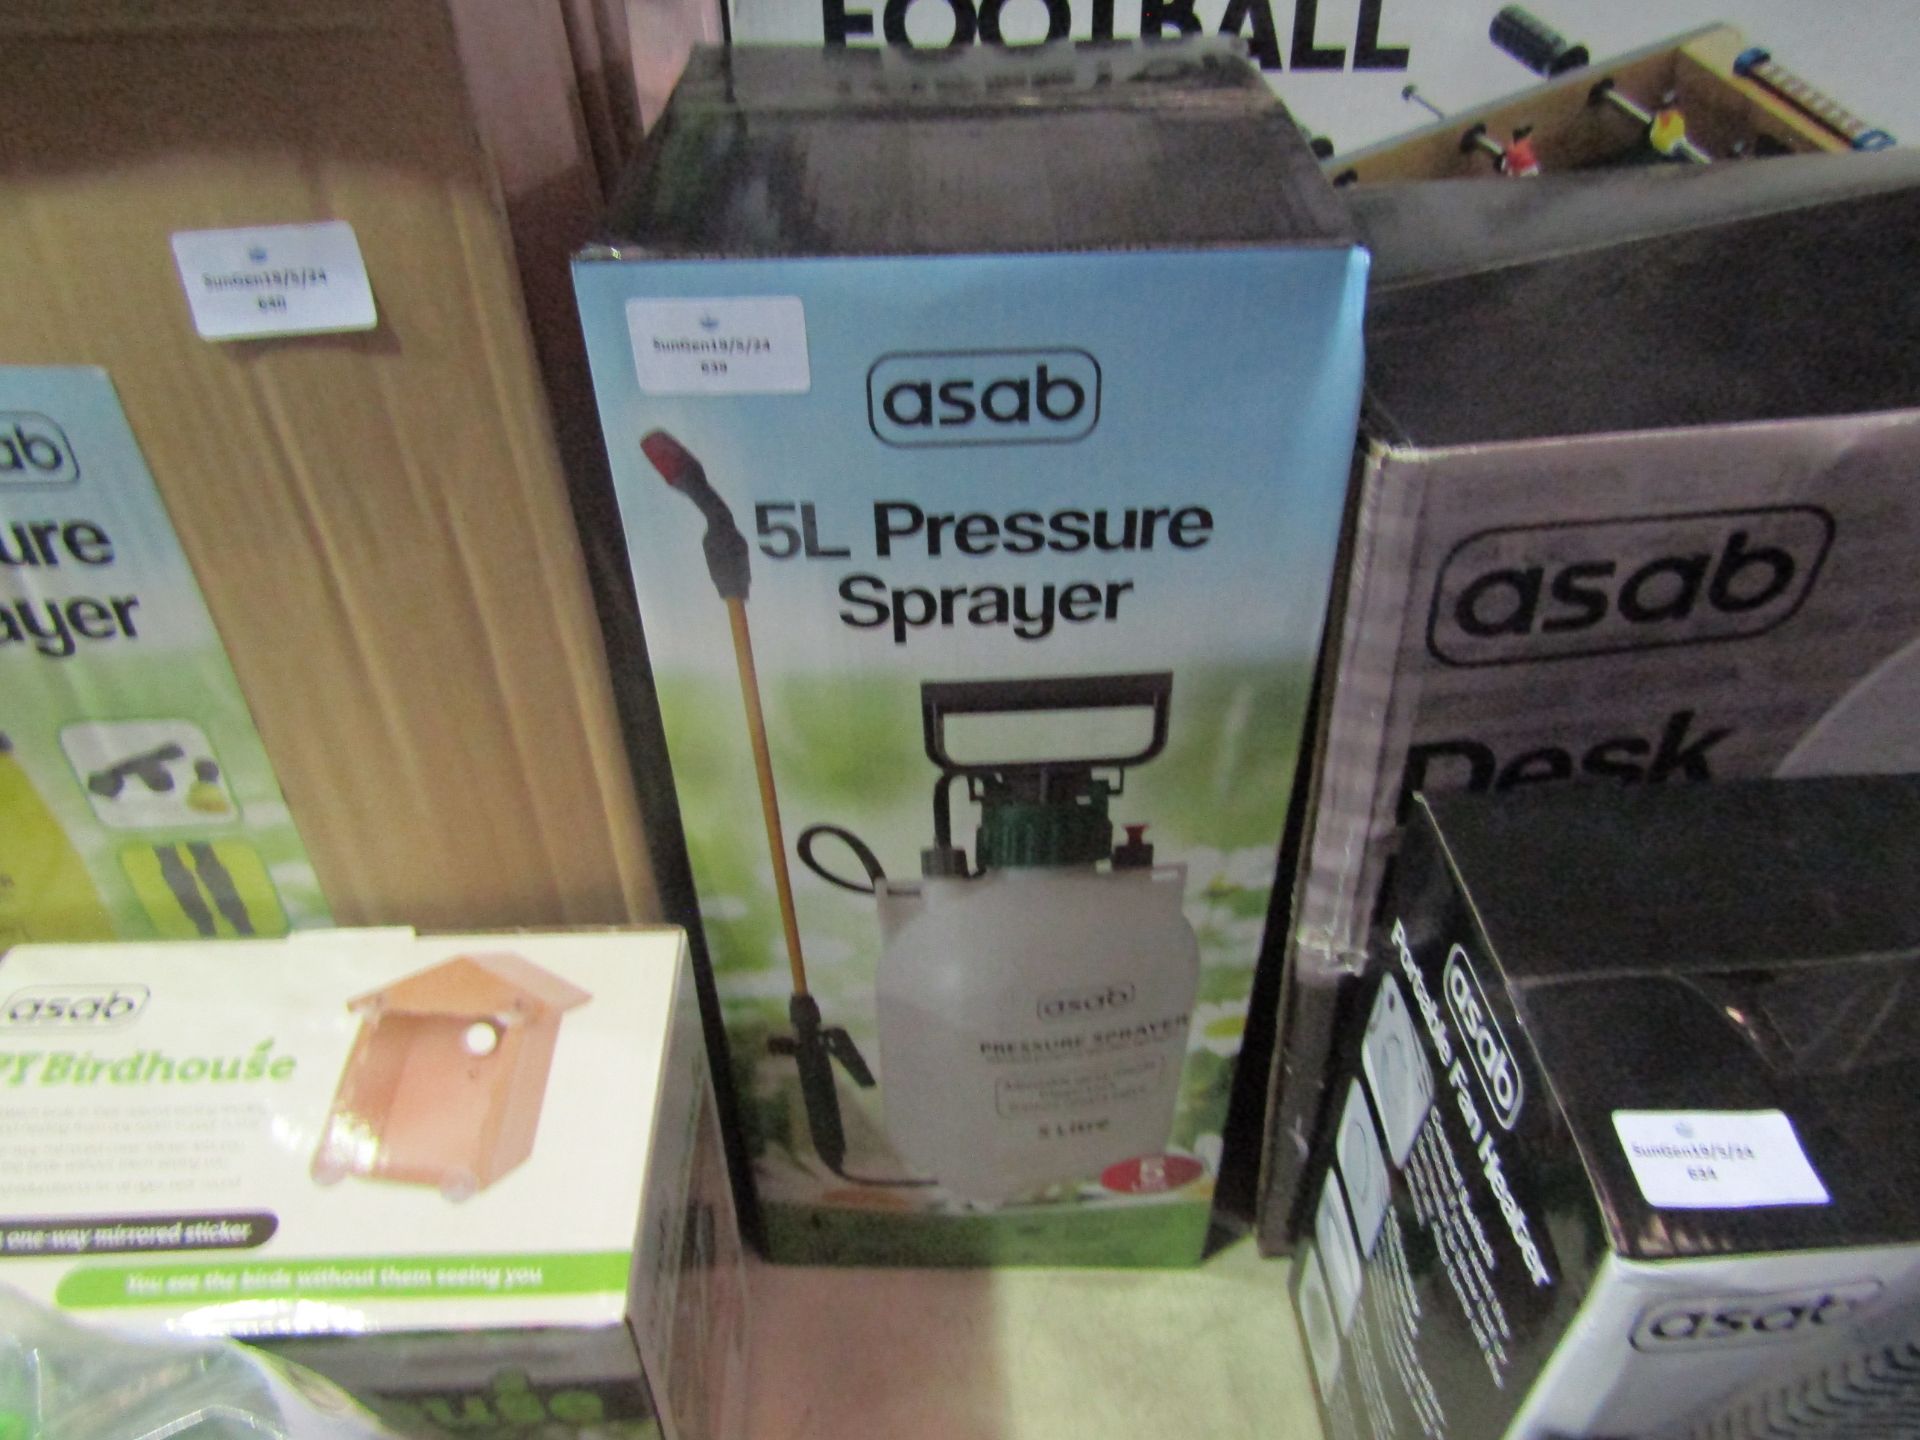 Asab 5 Pressure Sprayer - Unchecked & Boxed.